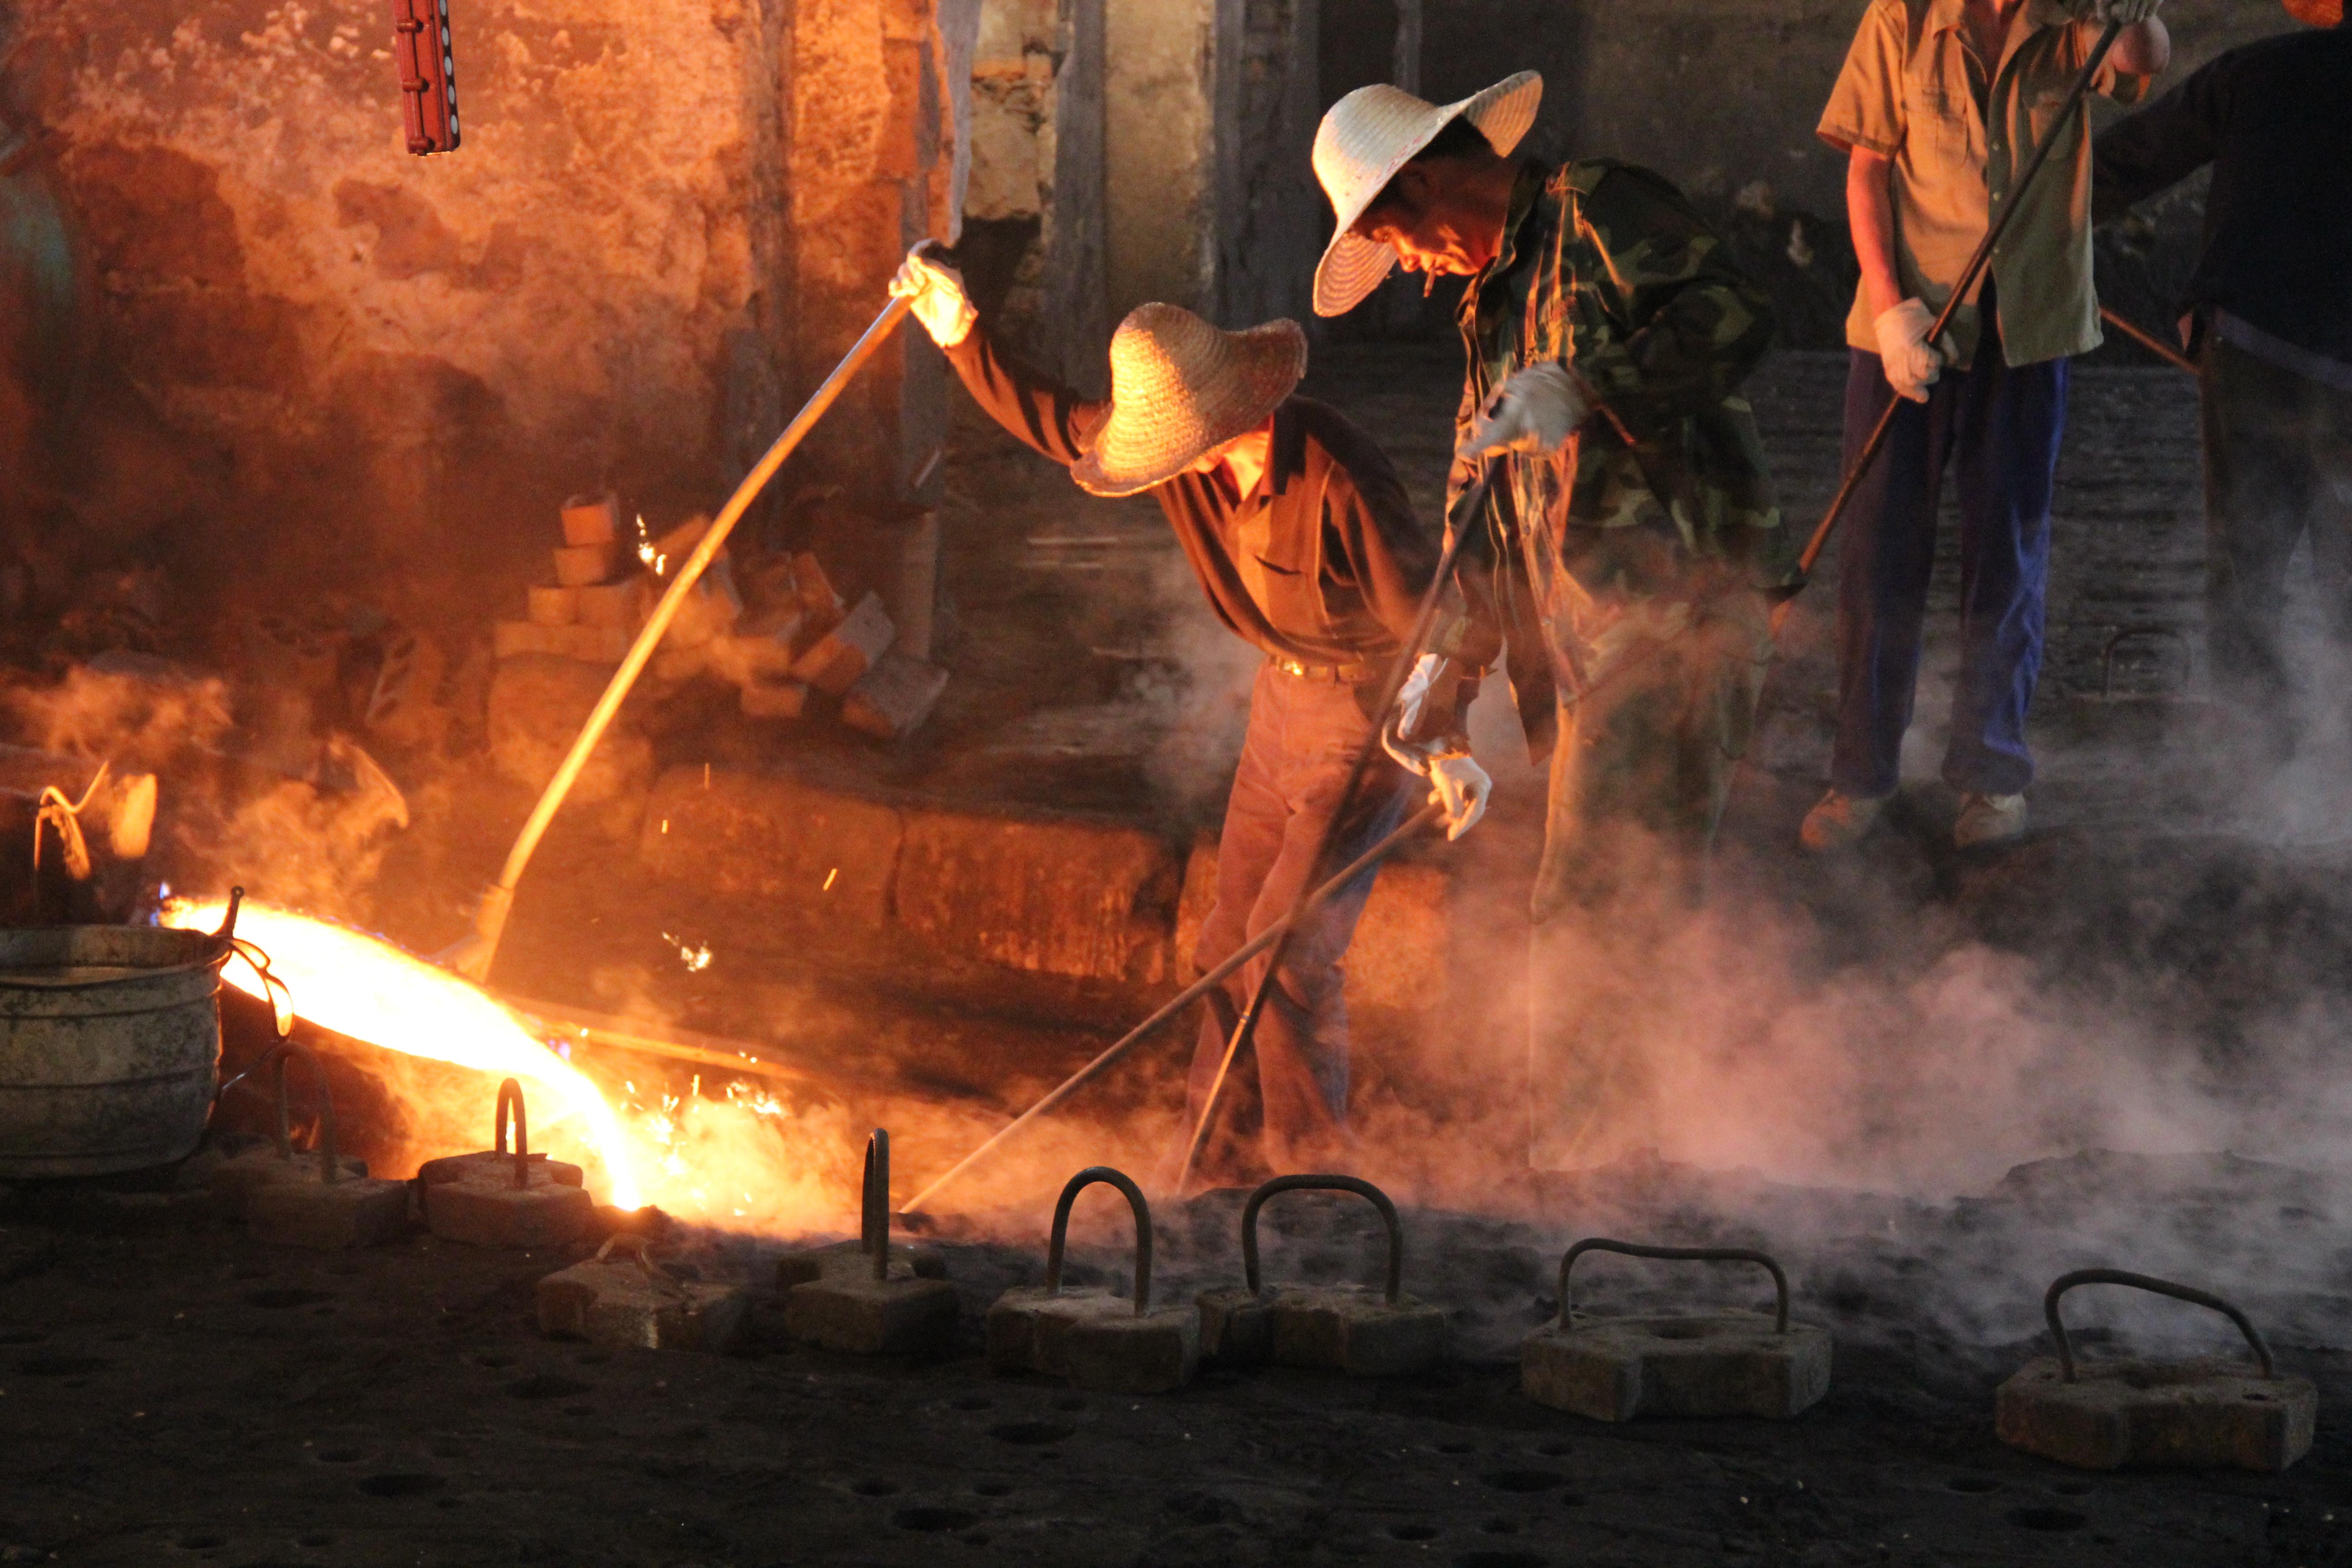 People work in a foundry near molten iron.